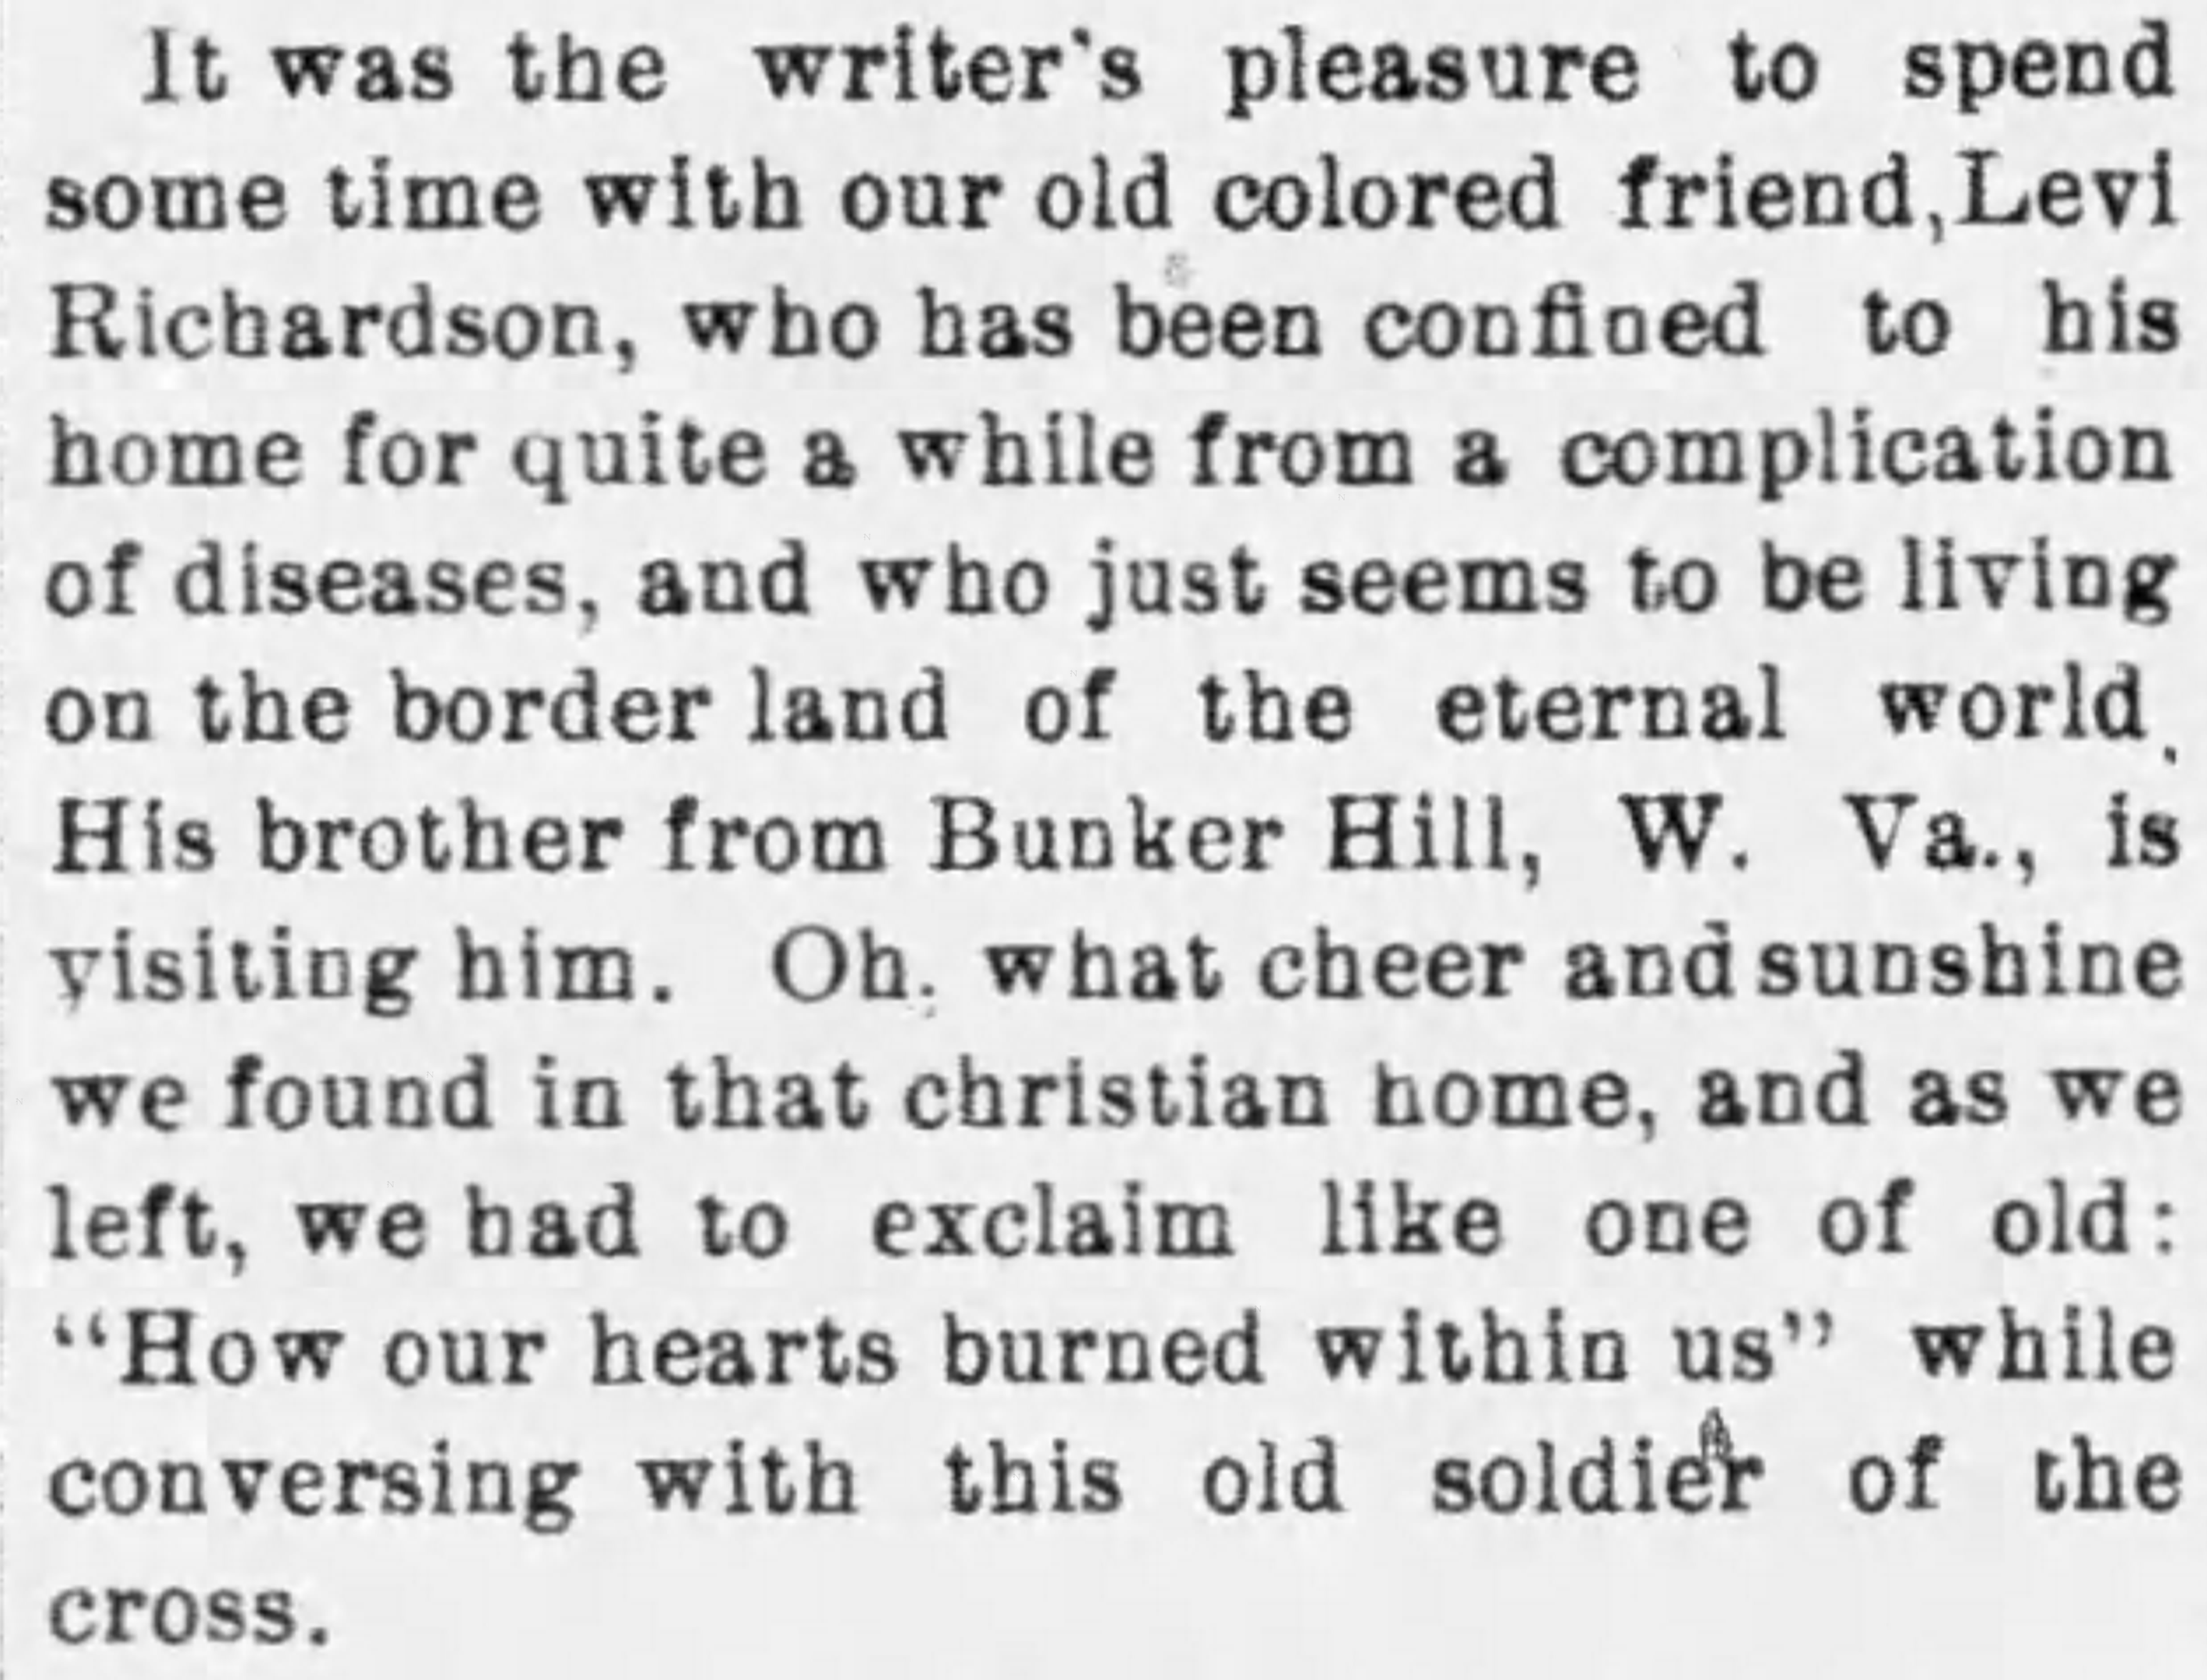 Short newspaper article about a visit the writer paid to Levi Richardson towards the end of his life